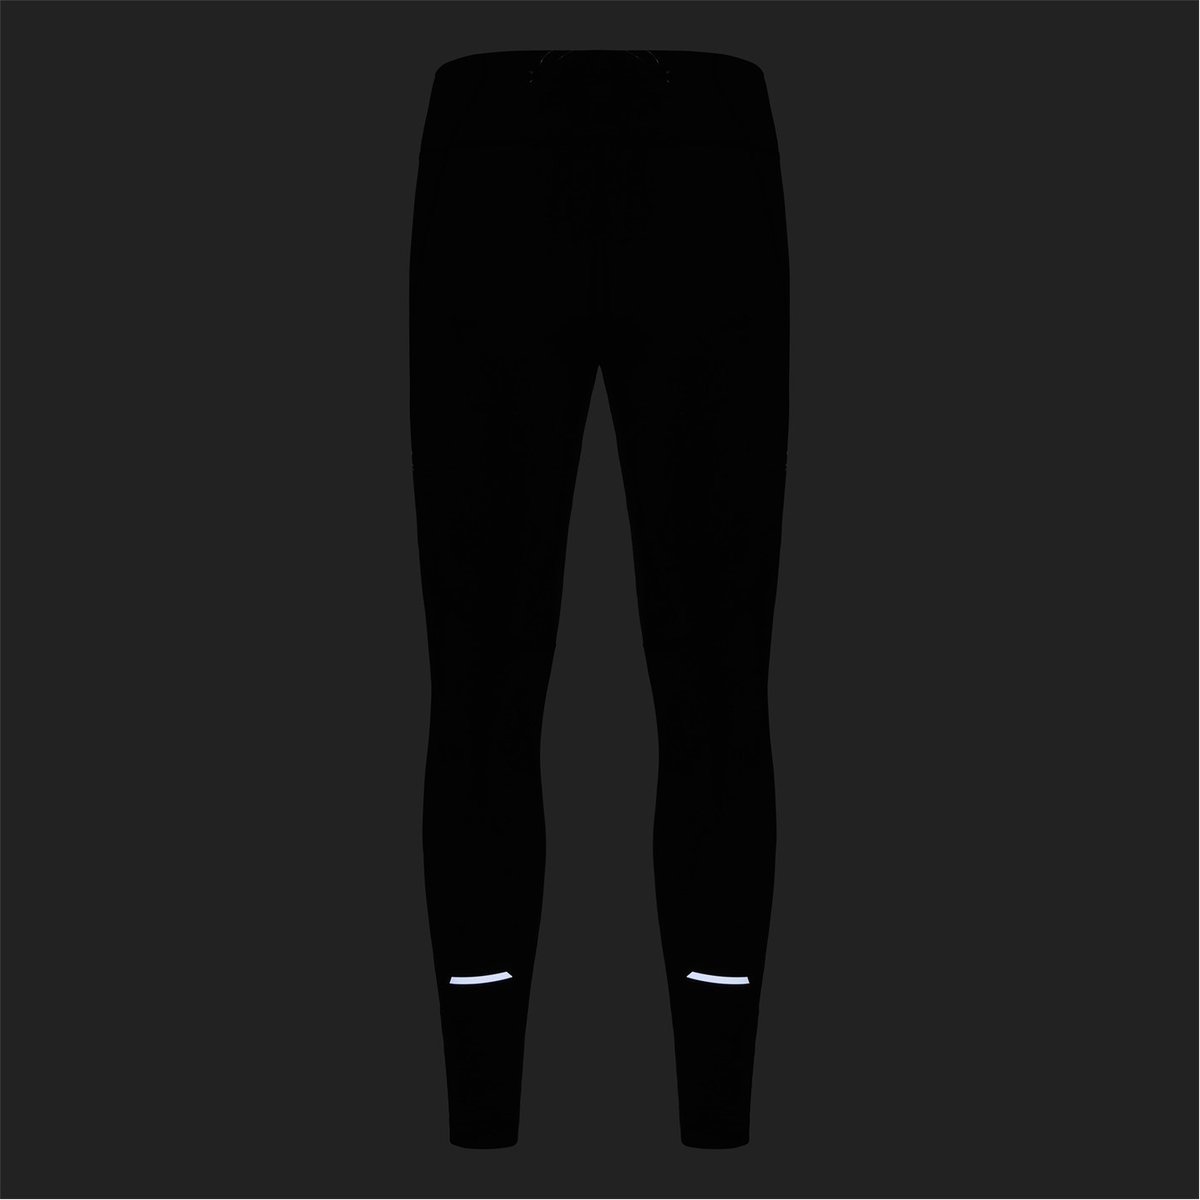 CAICJ98 Workout Leggings For Women Women's Lined Leggings Cold Weather  Running Tights Winter Thermal Hiking Biking Cycling Pants Black,XL -  Walmart.com